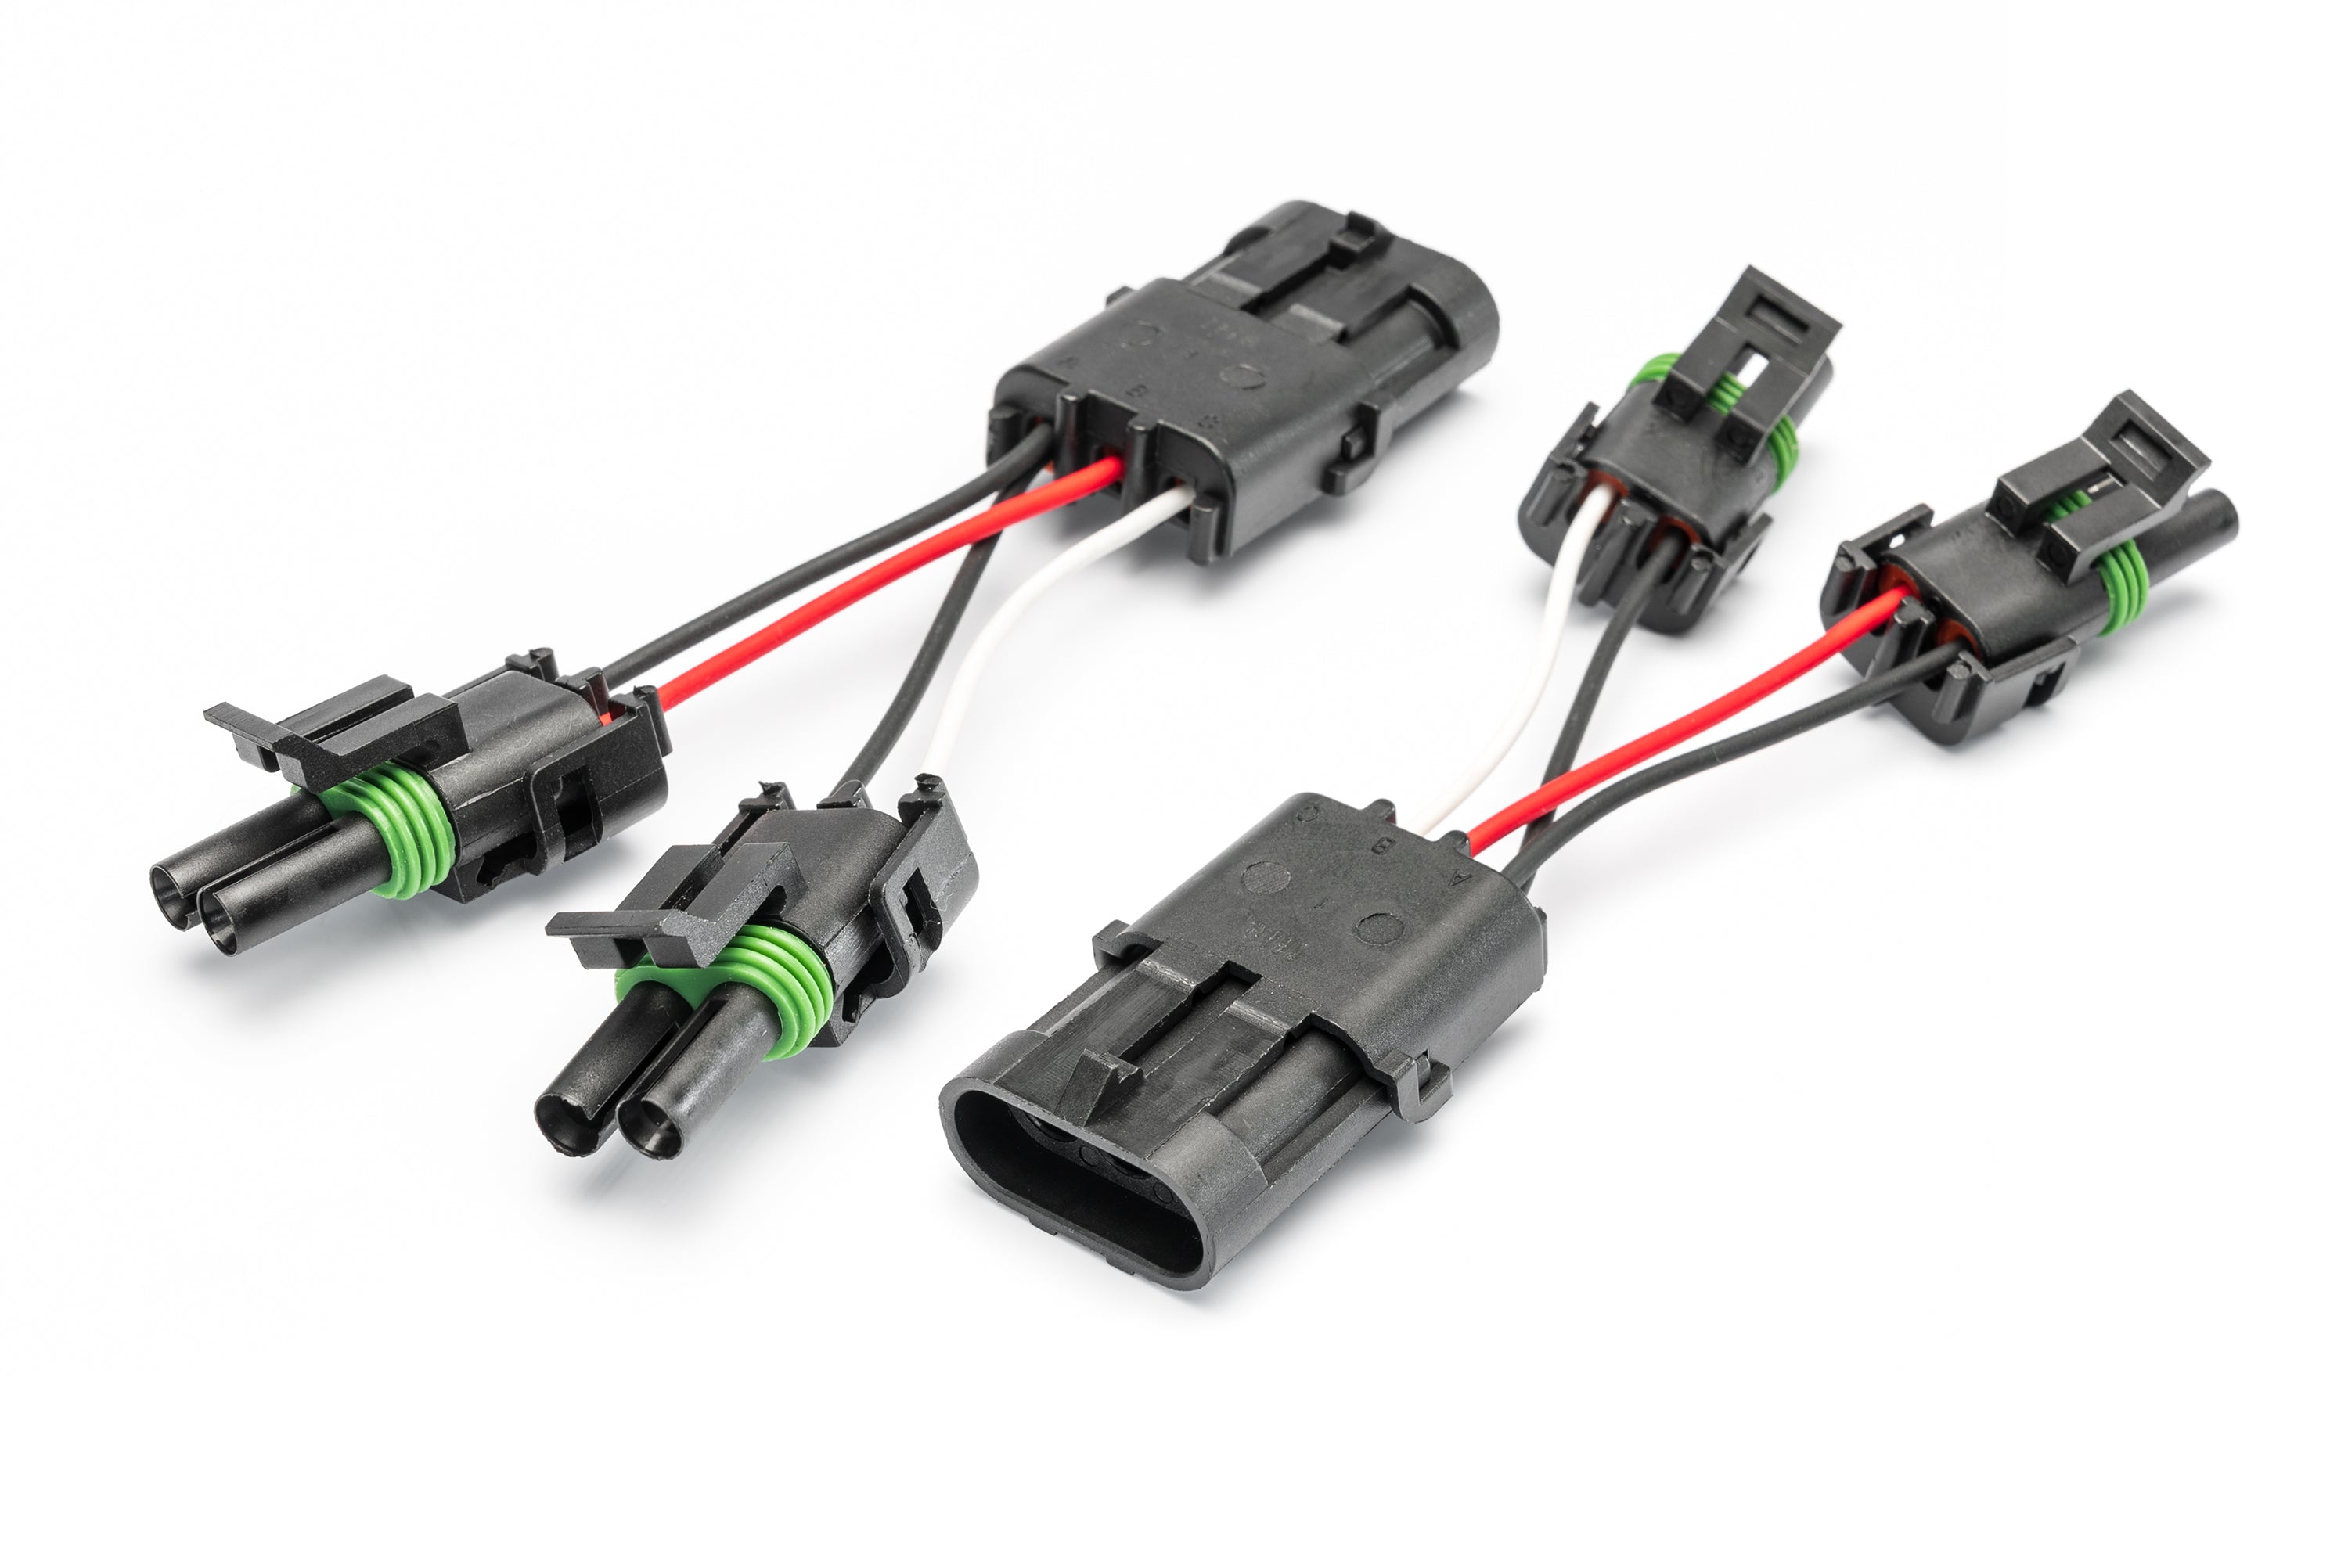 SPV Parts Harness 2 Pole WP Connector CROSSOVER Adapter SPLITTERS (Pair) - SPV Harness System (Works with MANY vehicles, See Details)